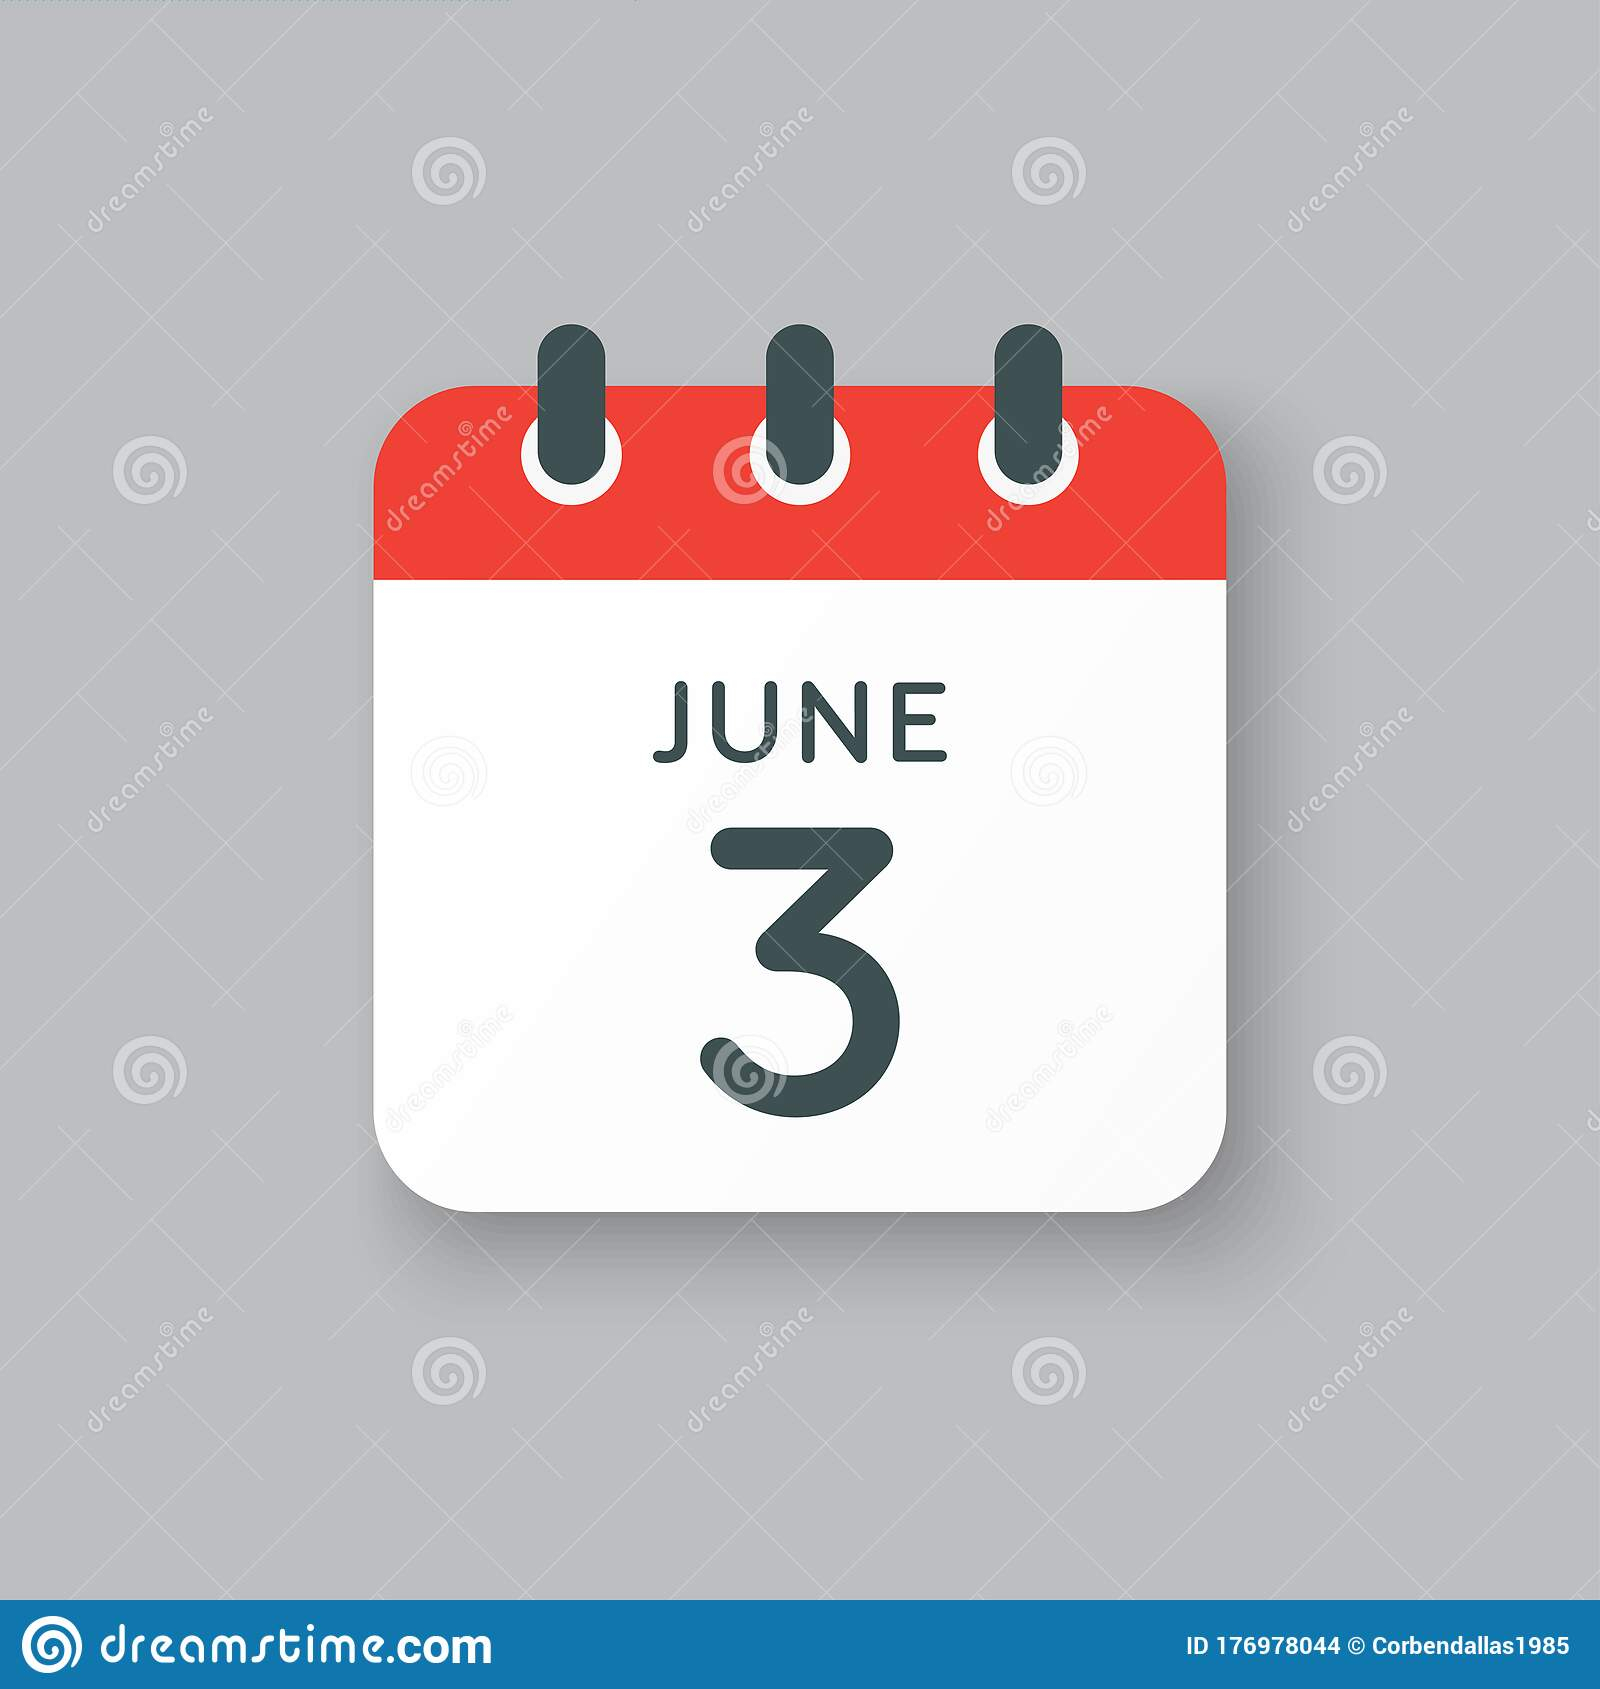 Icon Calendar Day 3 June, Summer Days Of The Year Stock Vector  Illustration Of Flat, Design with regard to Calendar Day Icon Generator